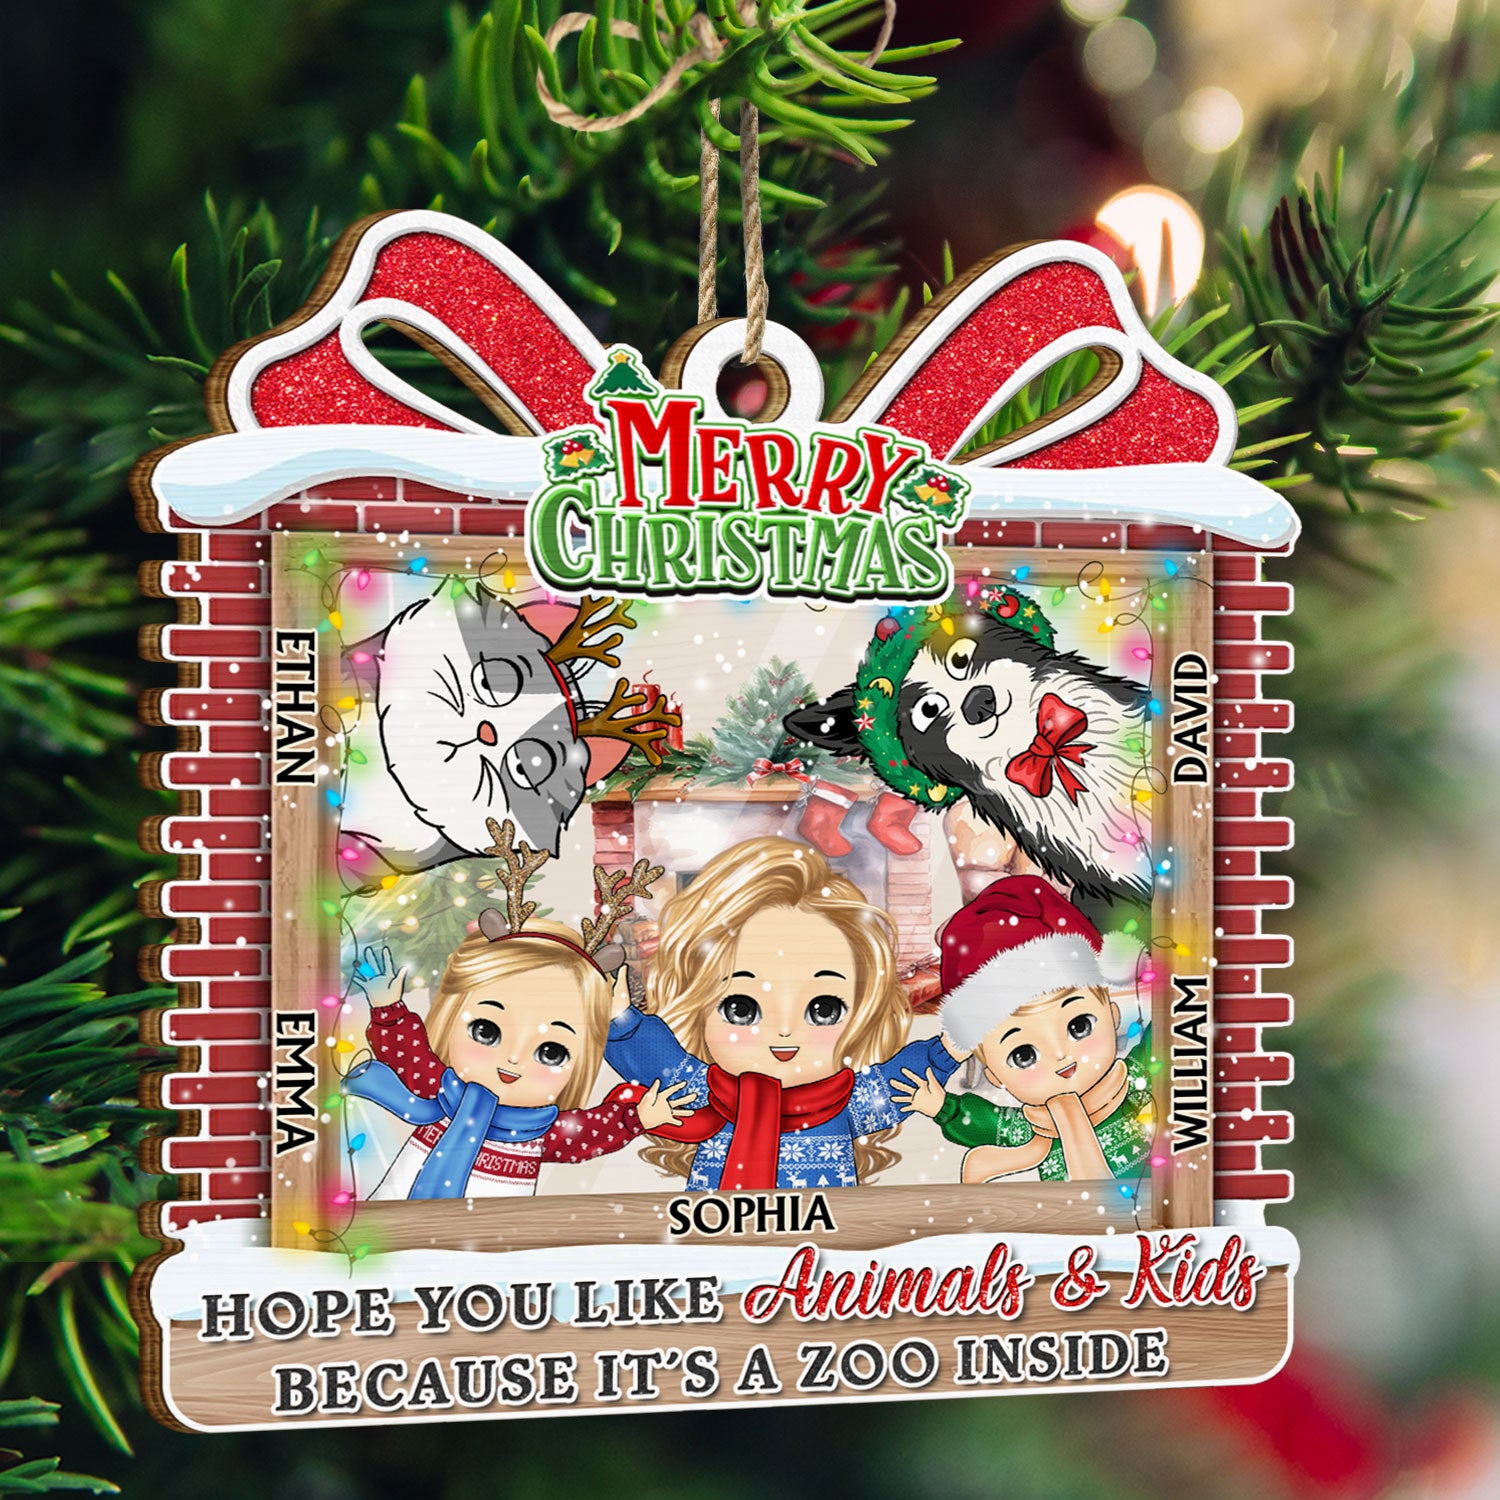 Merry Christmas Hope You Like Animals And Kids - Christmas Gift For Family, Parents, Pet Lovers - Personalized Custom Shaped Wooden Ornament